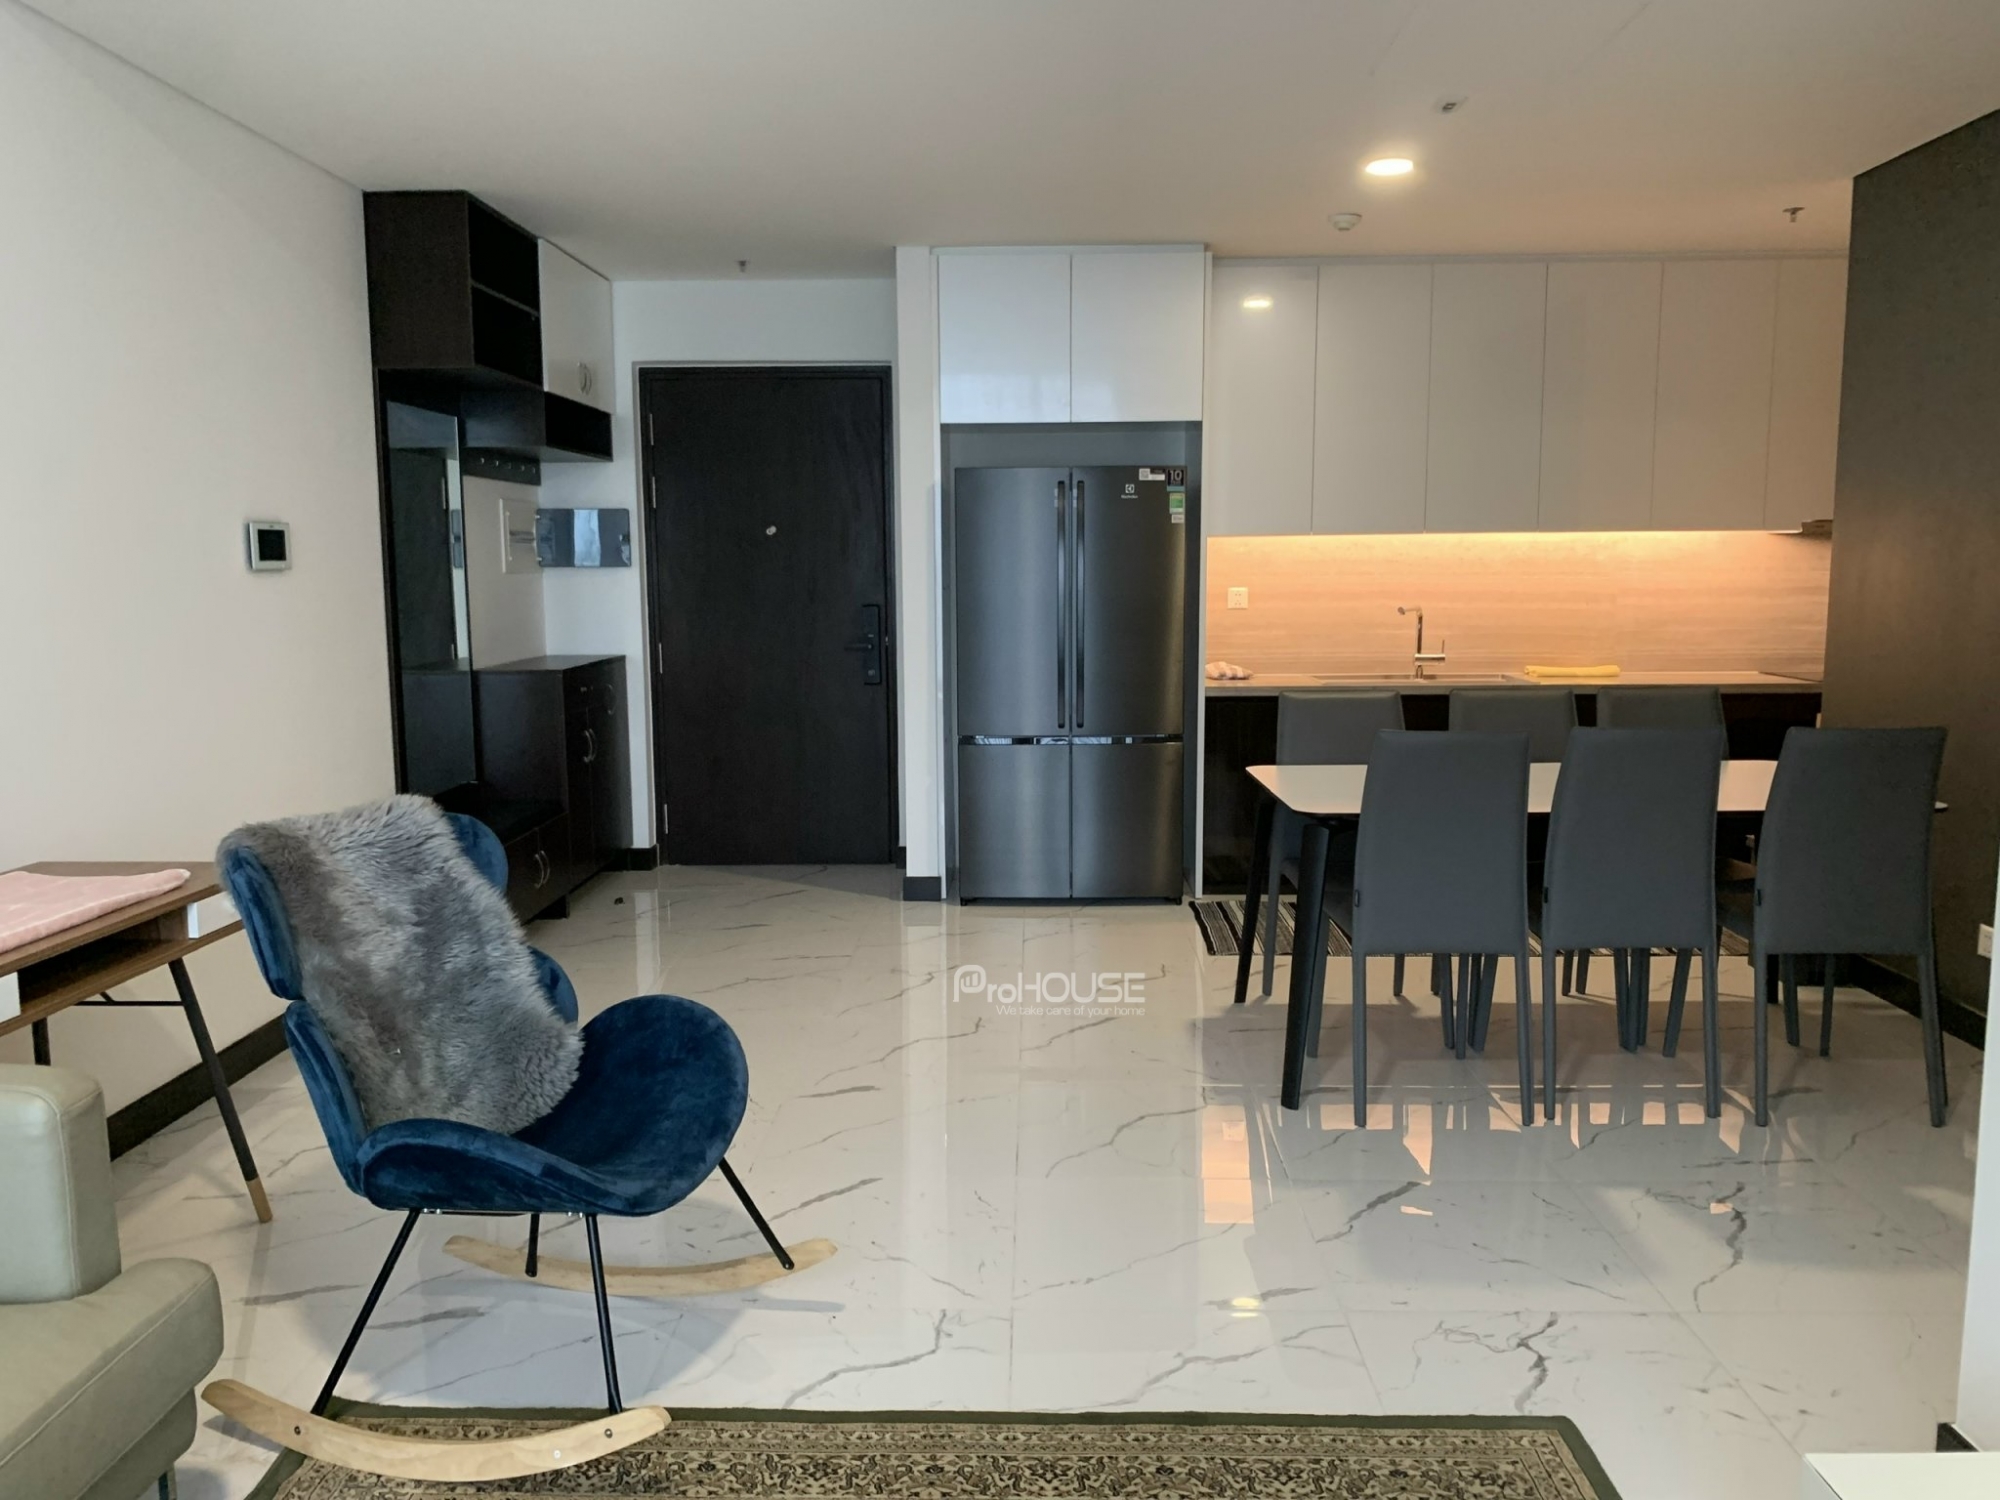 Cheap 2 bedroom apartment for rent in Empire City with full furniture